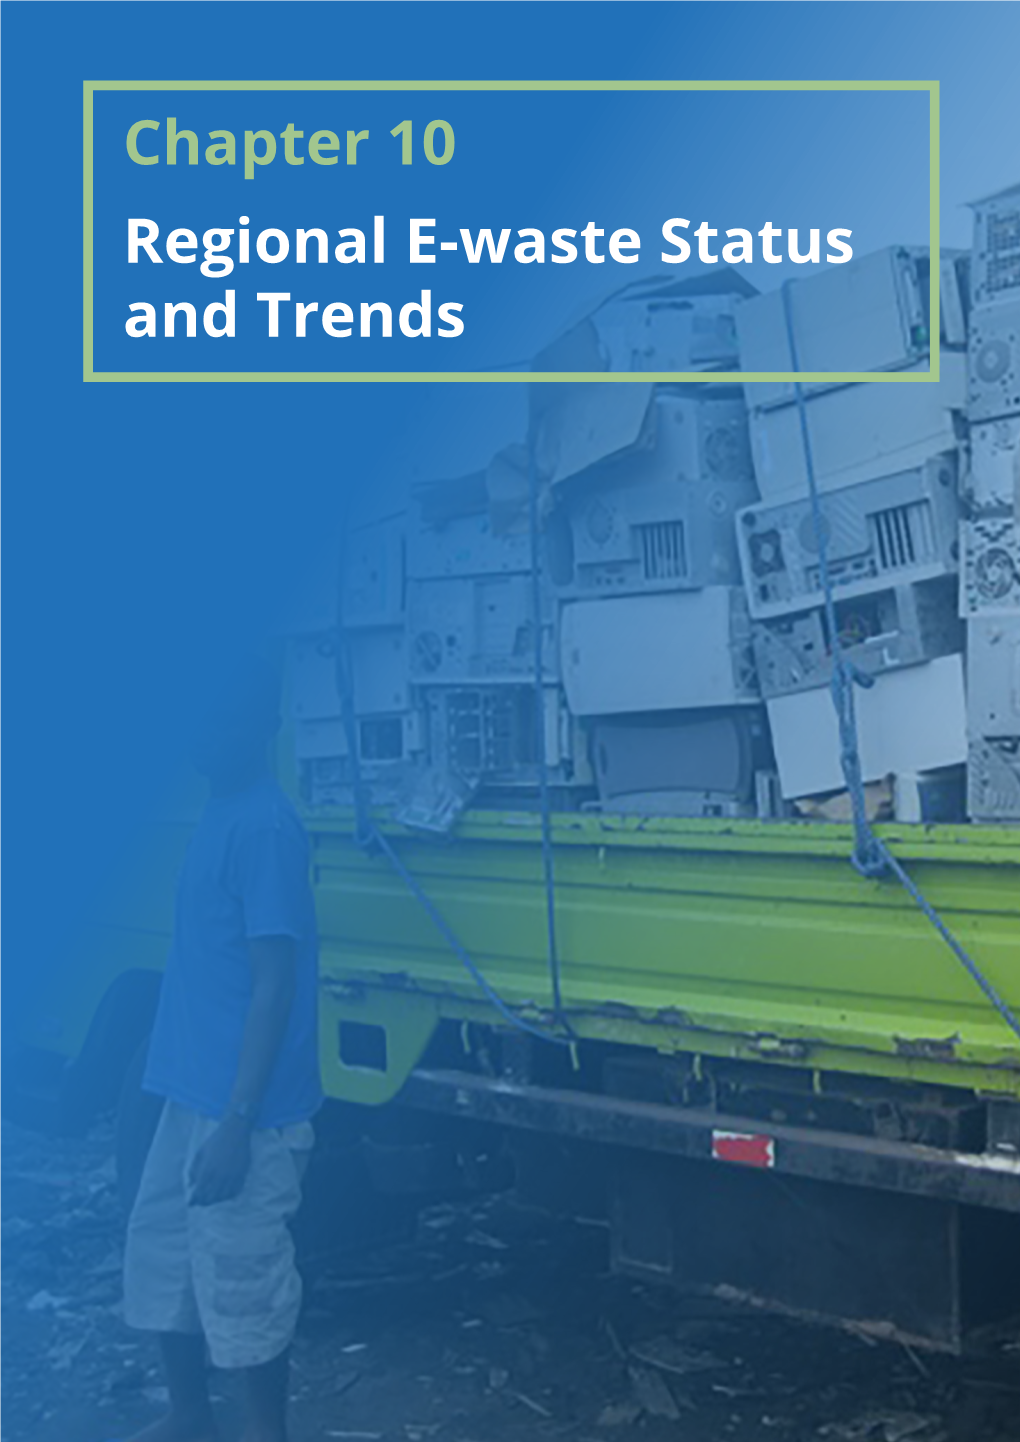 Chapter 10 Regional E-Waste Status and Trends